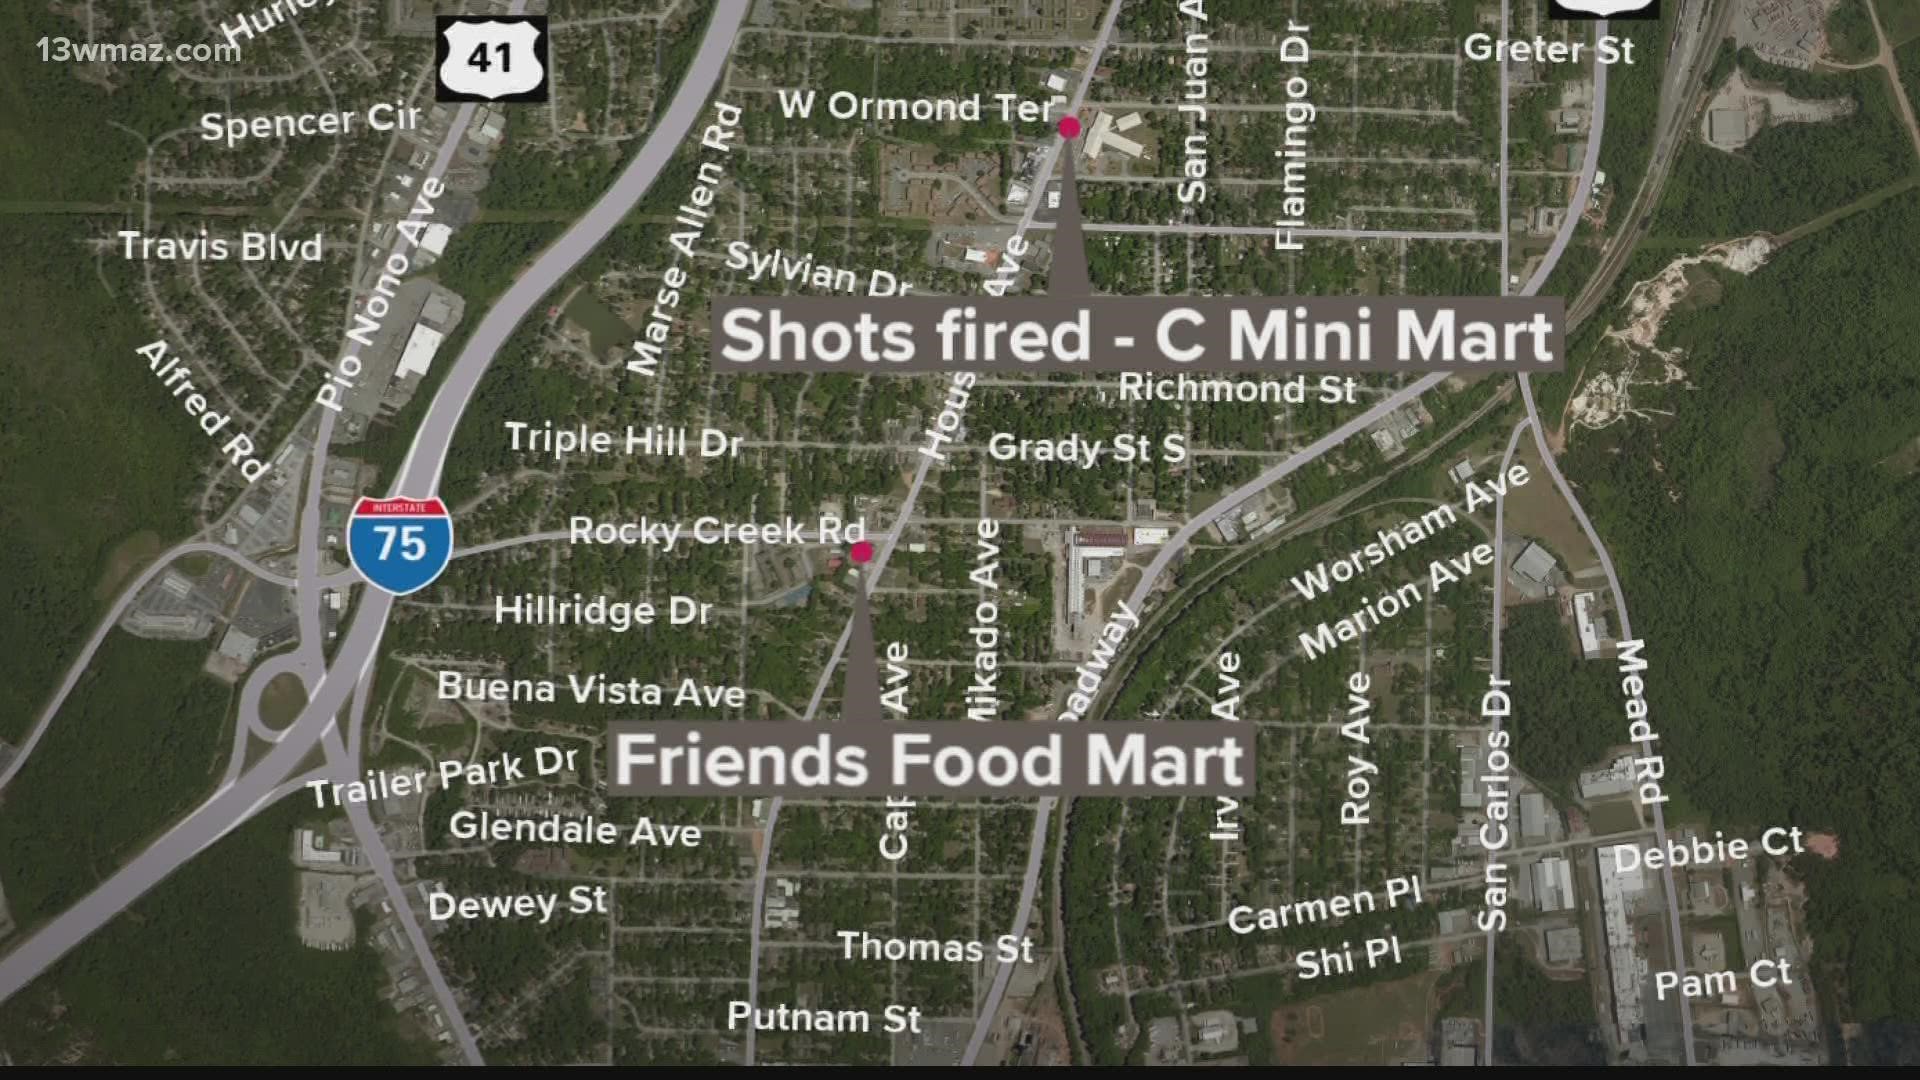 The shooting is located near Friends food Mart, an area where 3 people have died in shootings in the last 2 months.